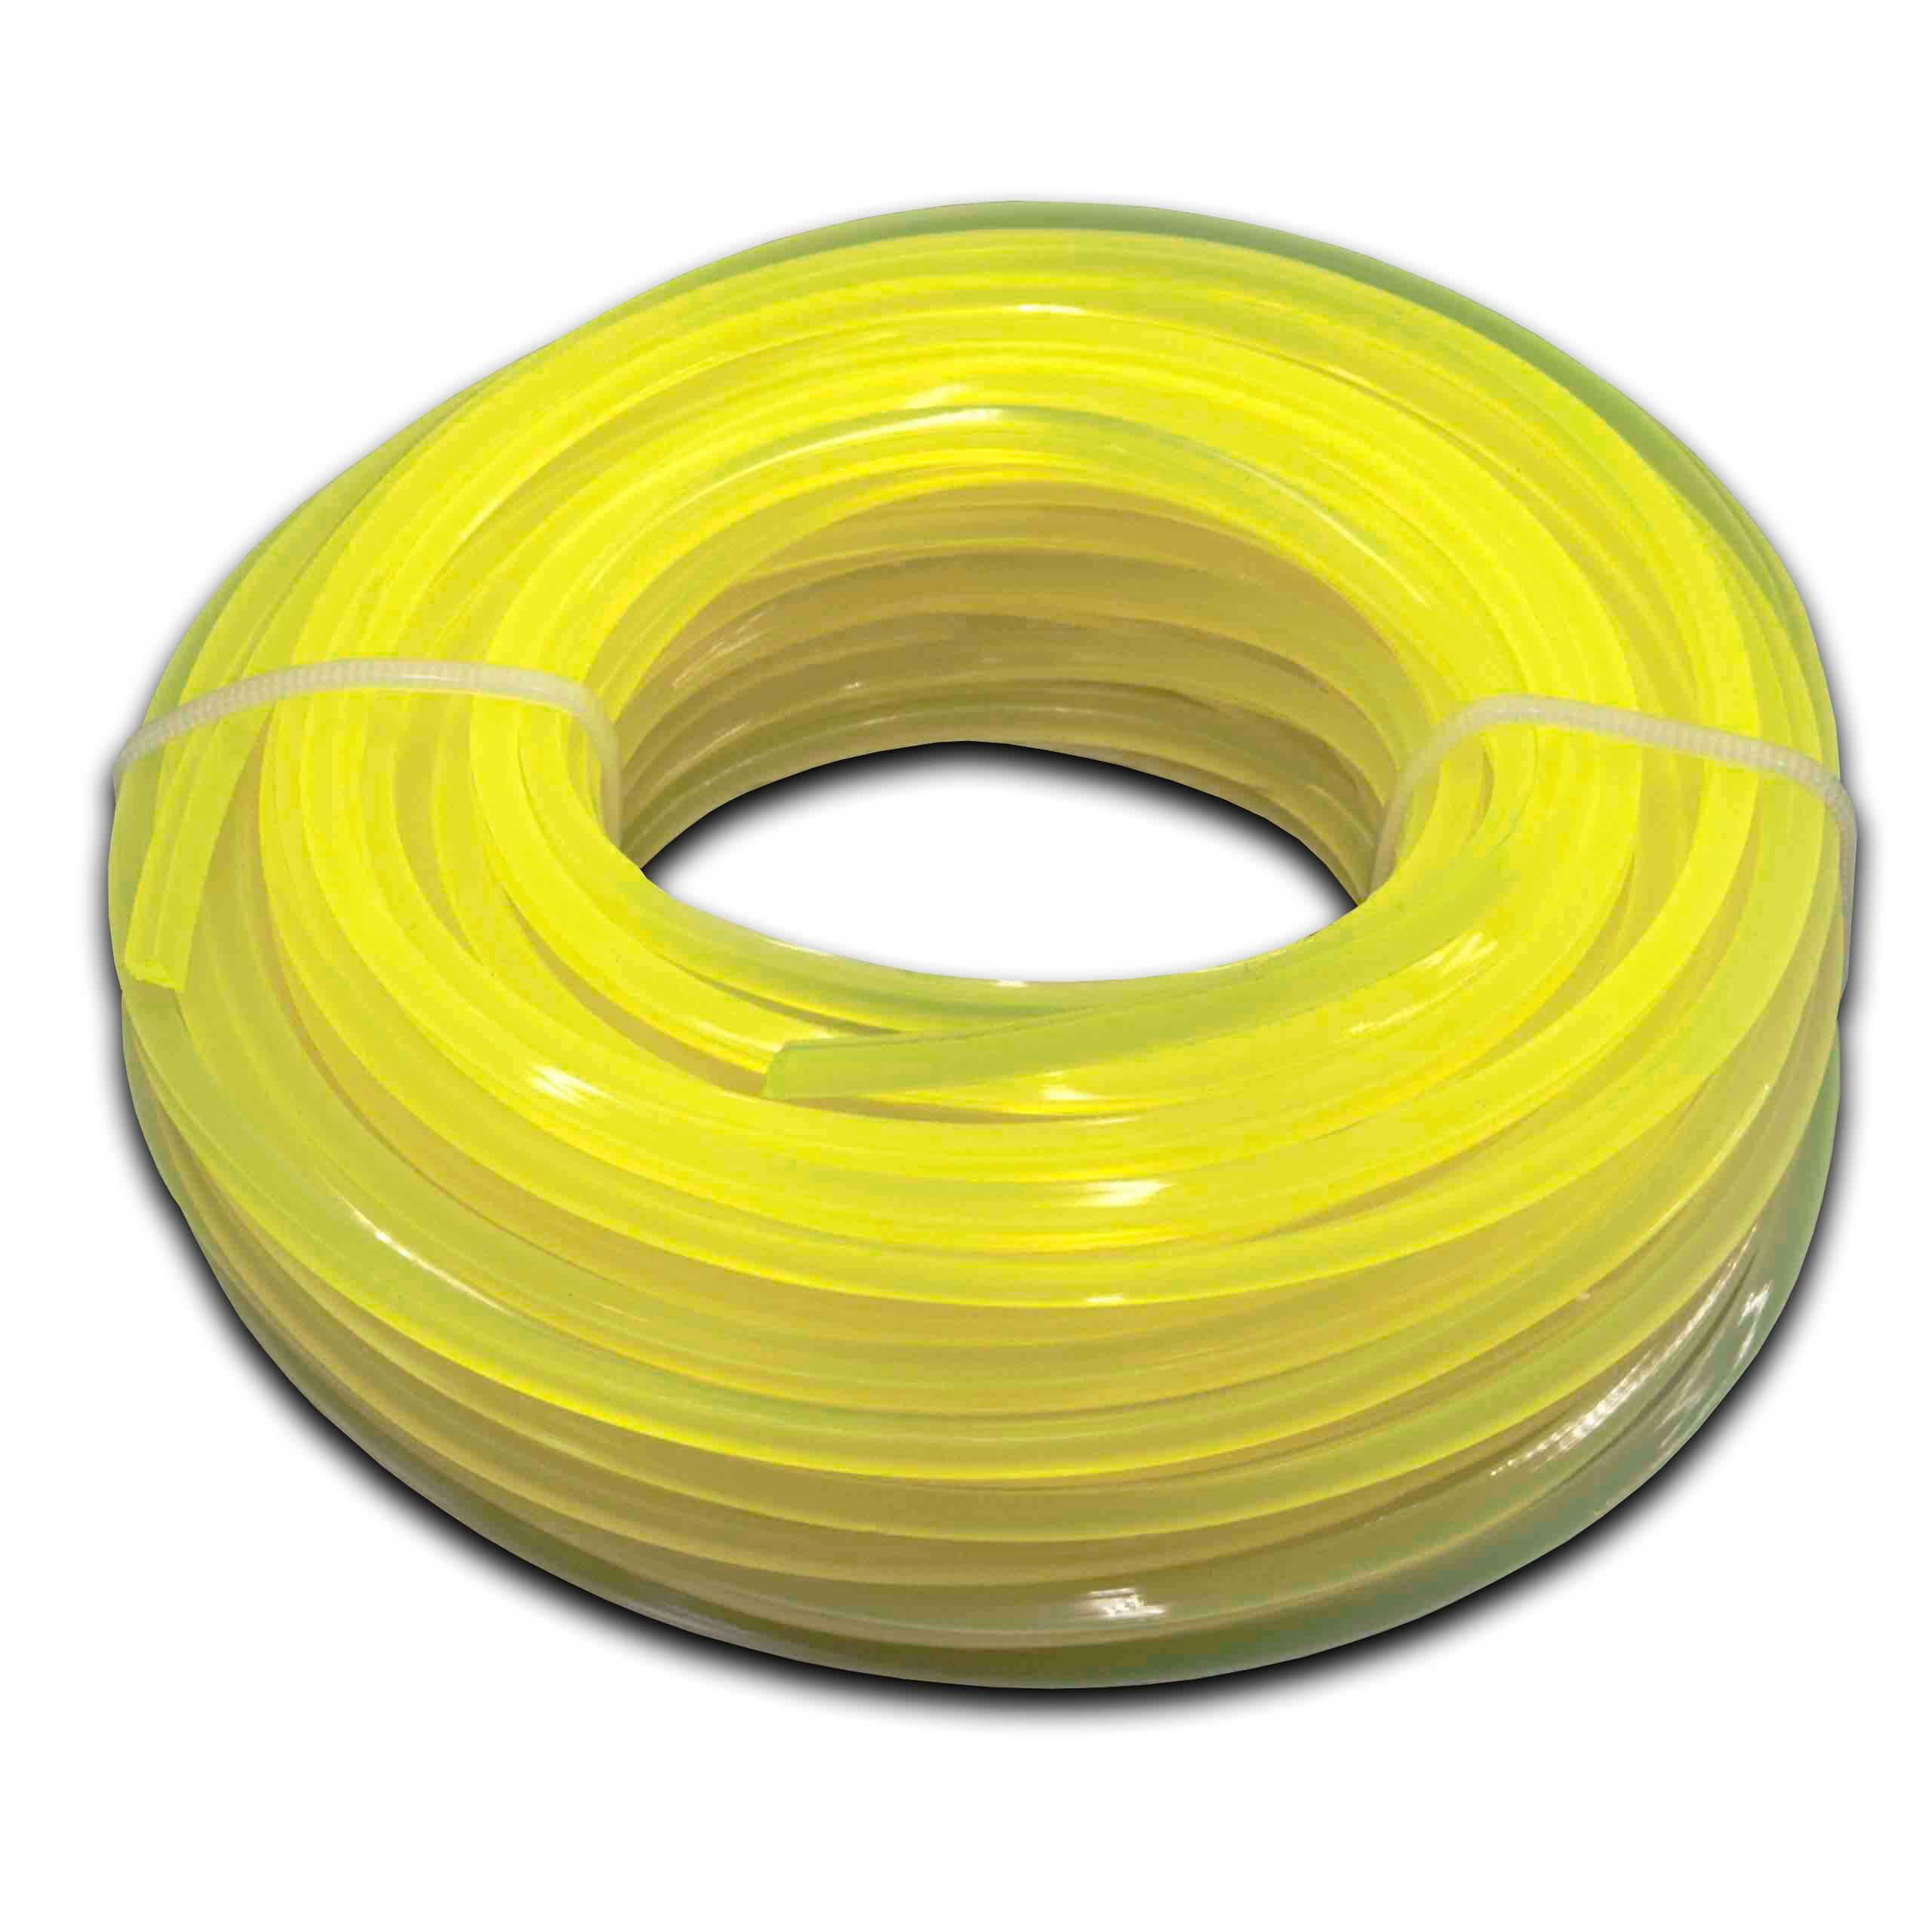 Line suitable for Bosch Makita Lawn Mower, Grass Trimmer - Trimmer Line Yellow, 2.4 mm x 15 m, Square